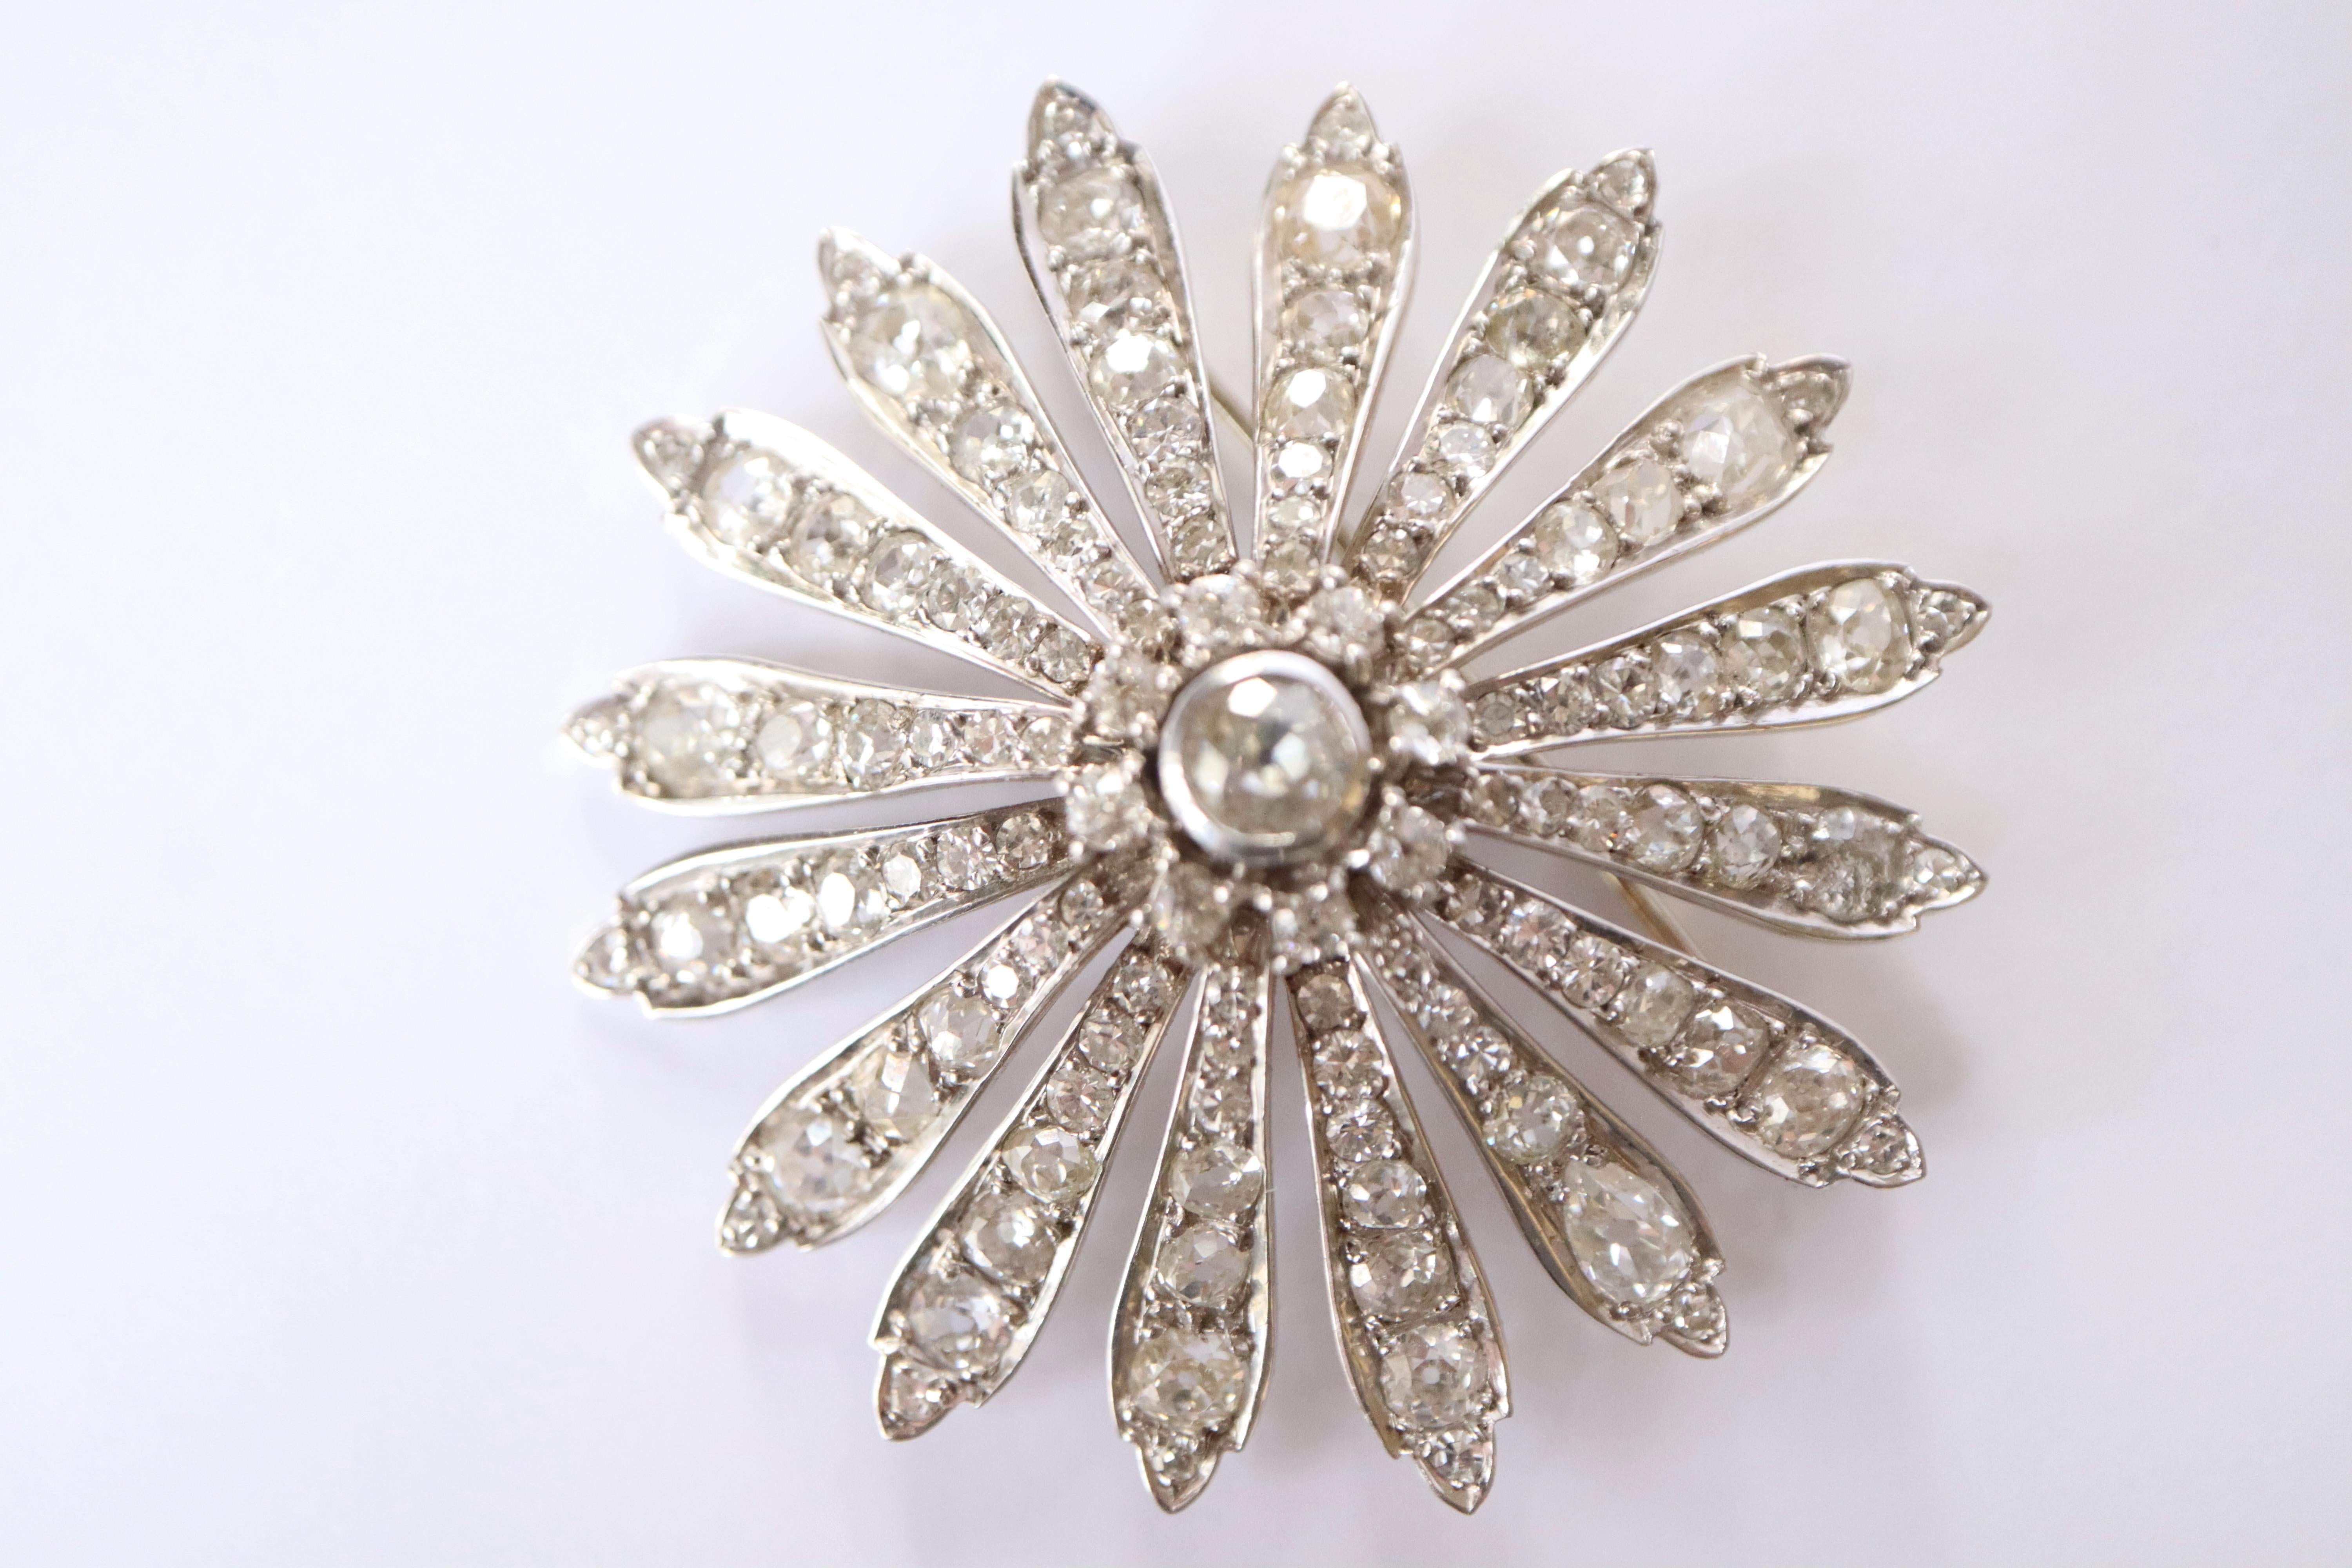 Mixed Cut Vintage Daisy Brooch circa 1900-1930 in 18 Carat White Gold and Diamonds For Sale